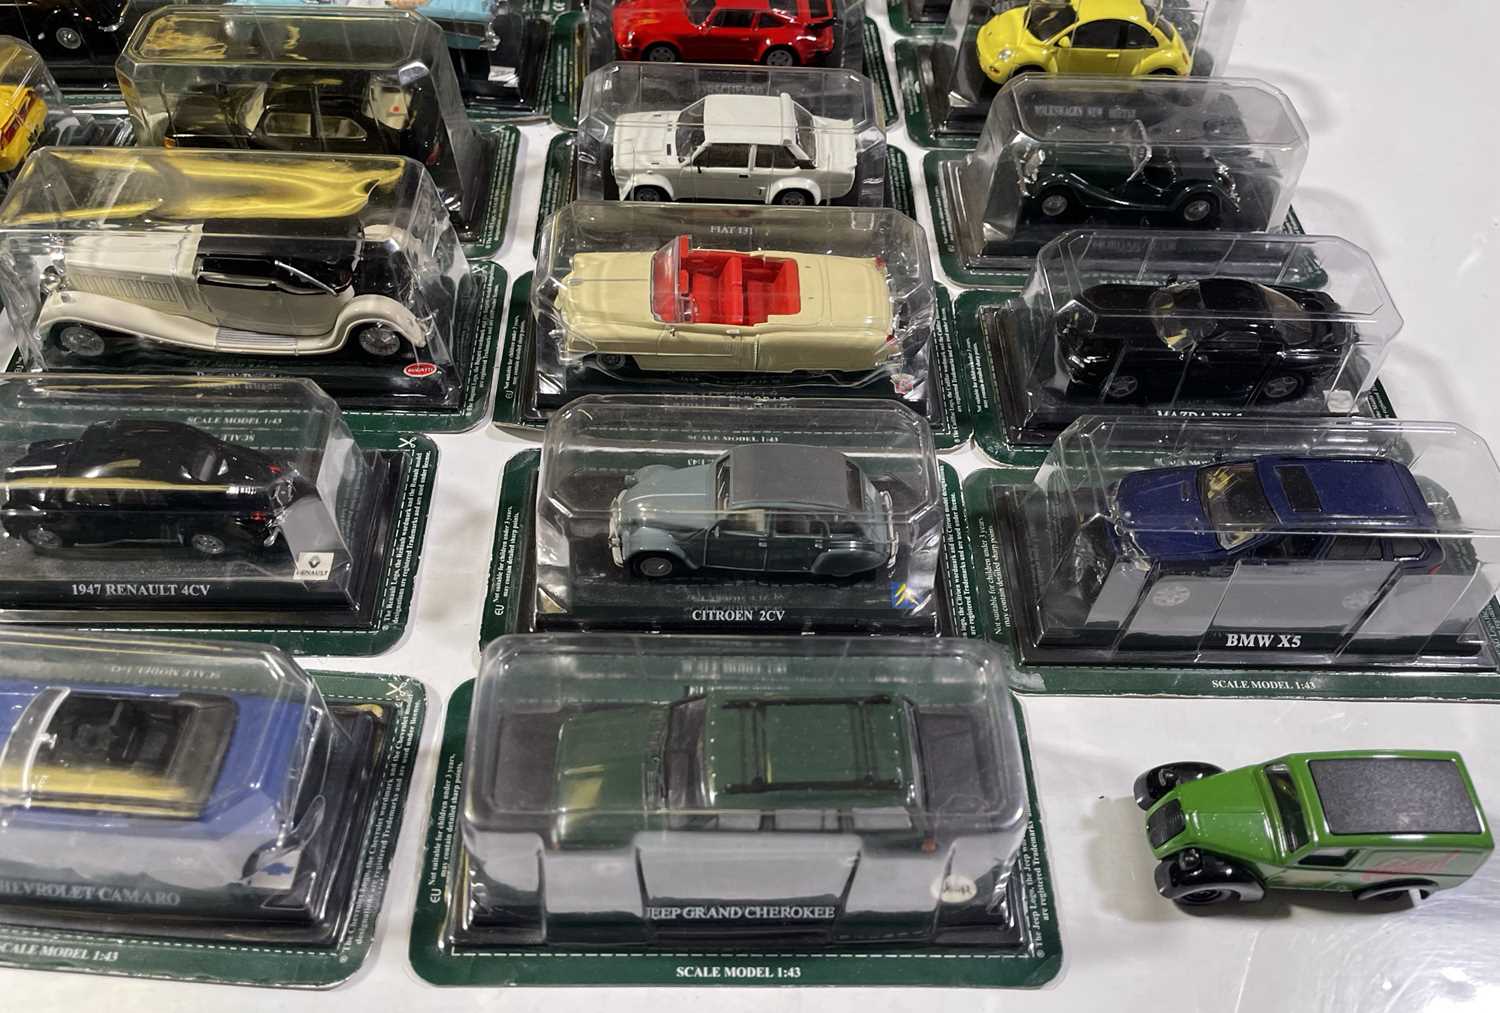 LARGE COLLECTION OF DEL PRADO SCALE MODEL CARS. - Image 7 of 8